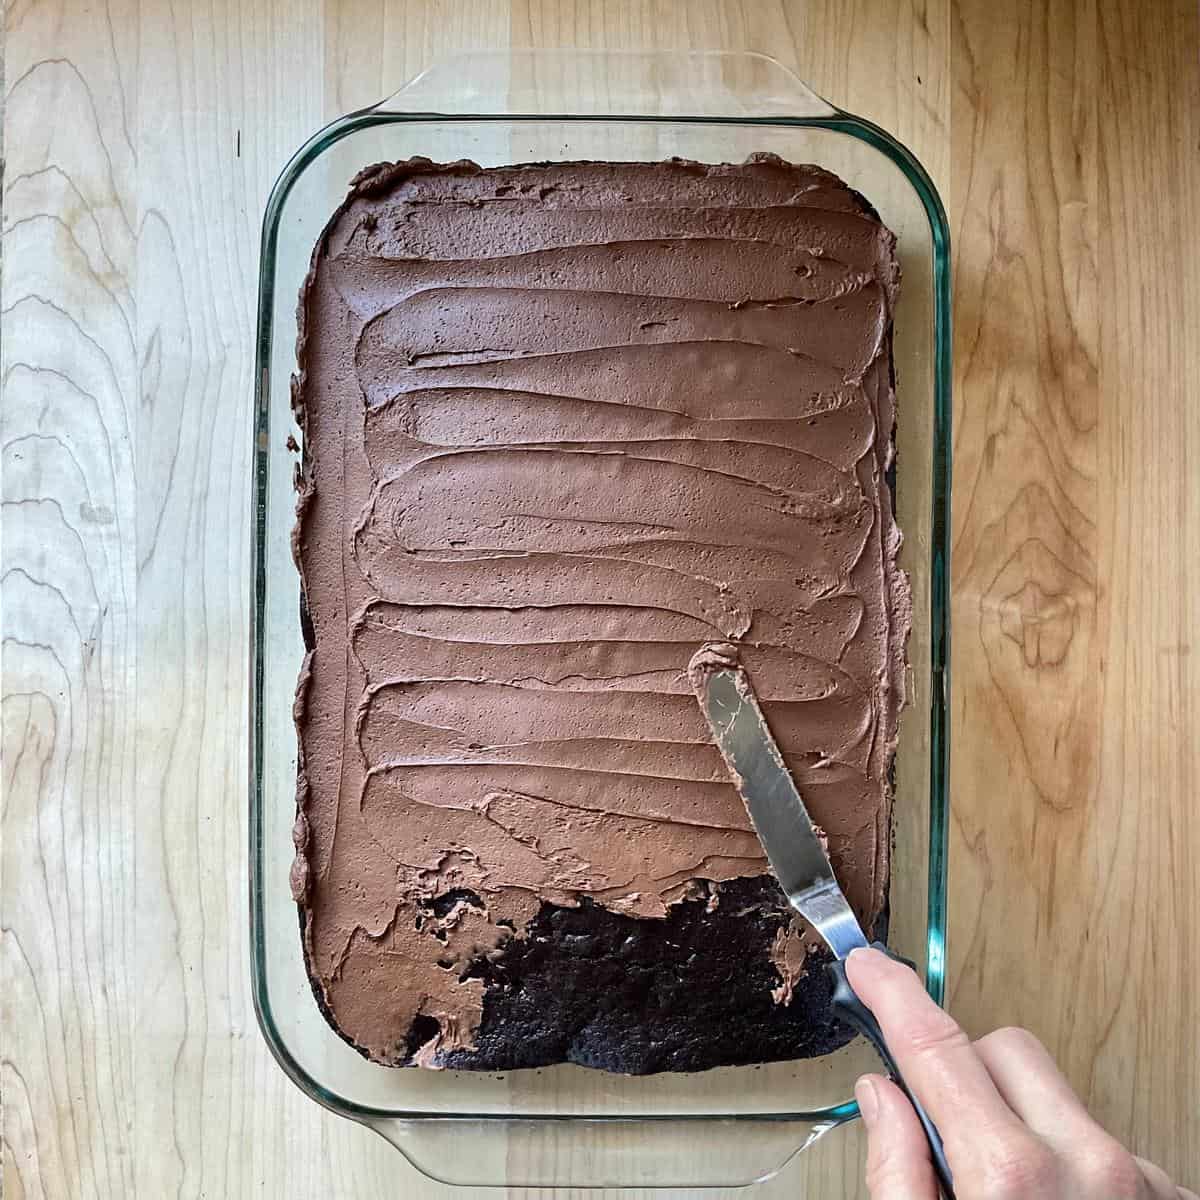 Chocolate frosting being spread over a chocolate cake. 